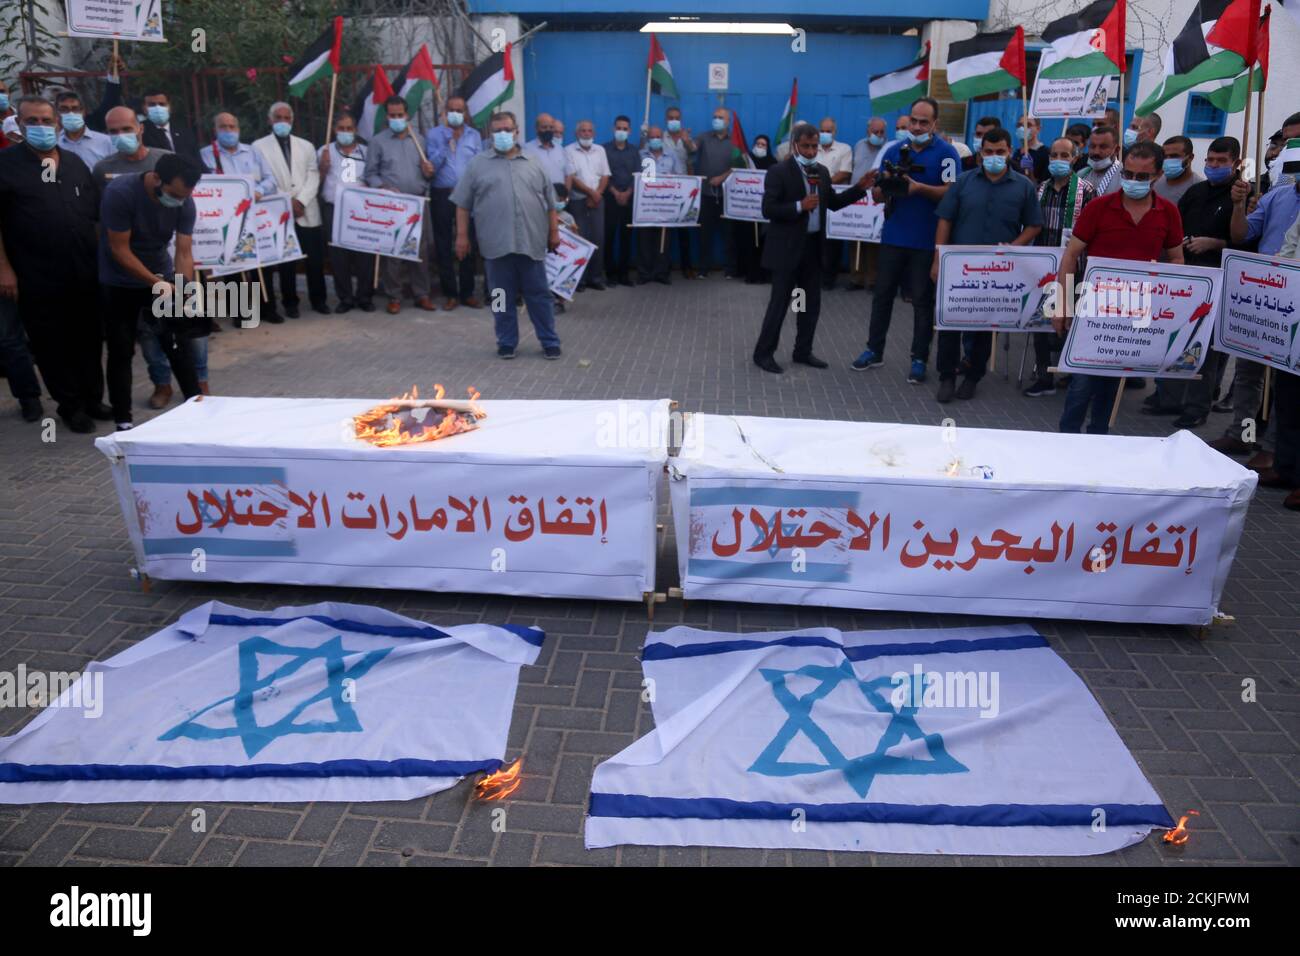 September 15, 2020: Gaza, Palestine.15 September 2020. Palestinians hold a protest outside the UN headquarters in Gaza City as the UAE and Bahrain sign their normalisation agreements with Israel in Washington. Protesters burnt the Israeli flag and  carried banners denouncing the deal as ''the deal of shame'', and the normalisation of ties as a betrayal by the Arab states. While the White House has described the accords as a ''declaration of peace'', Palestinians have fully rejected them as they feel even more isolated in resisting the Israeli occupation, while their leaders have called for a l Stock Photo